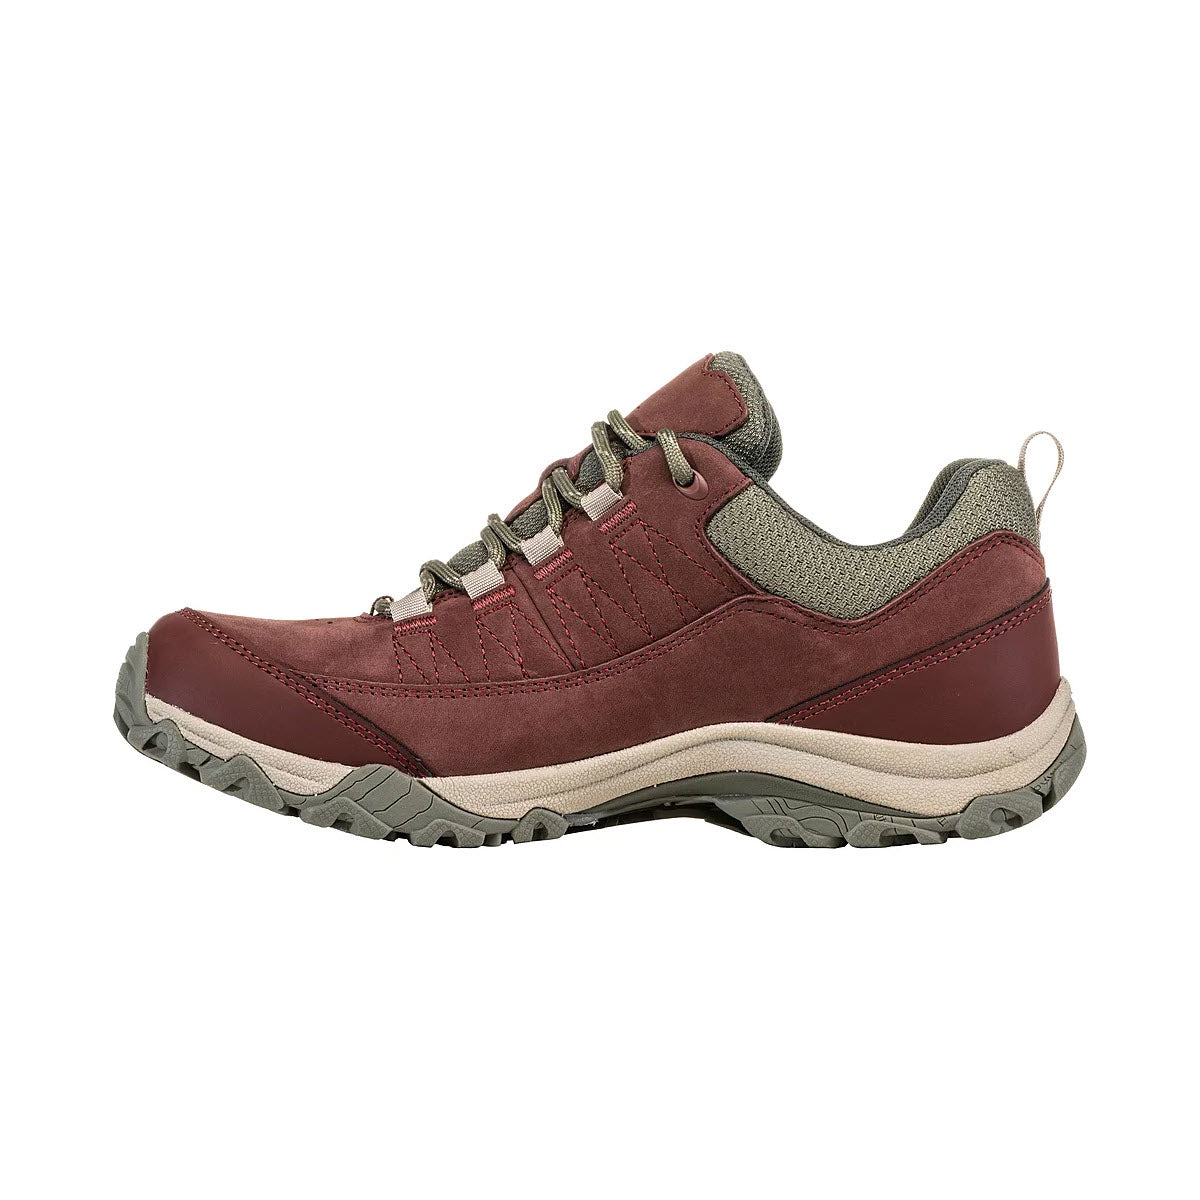 Side view of a single OBOZ OUSEL LOW B-DRY PORT hiking shoe featuring B-DRY waterproof technology, designed for rugged terrain.